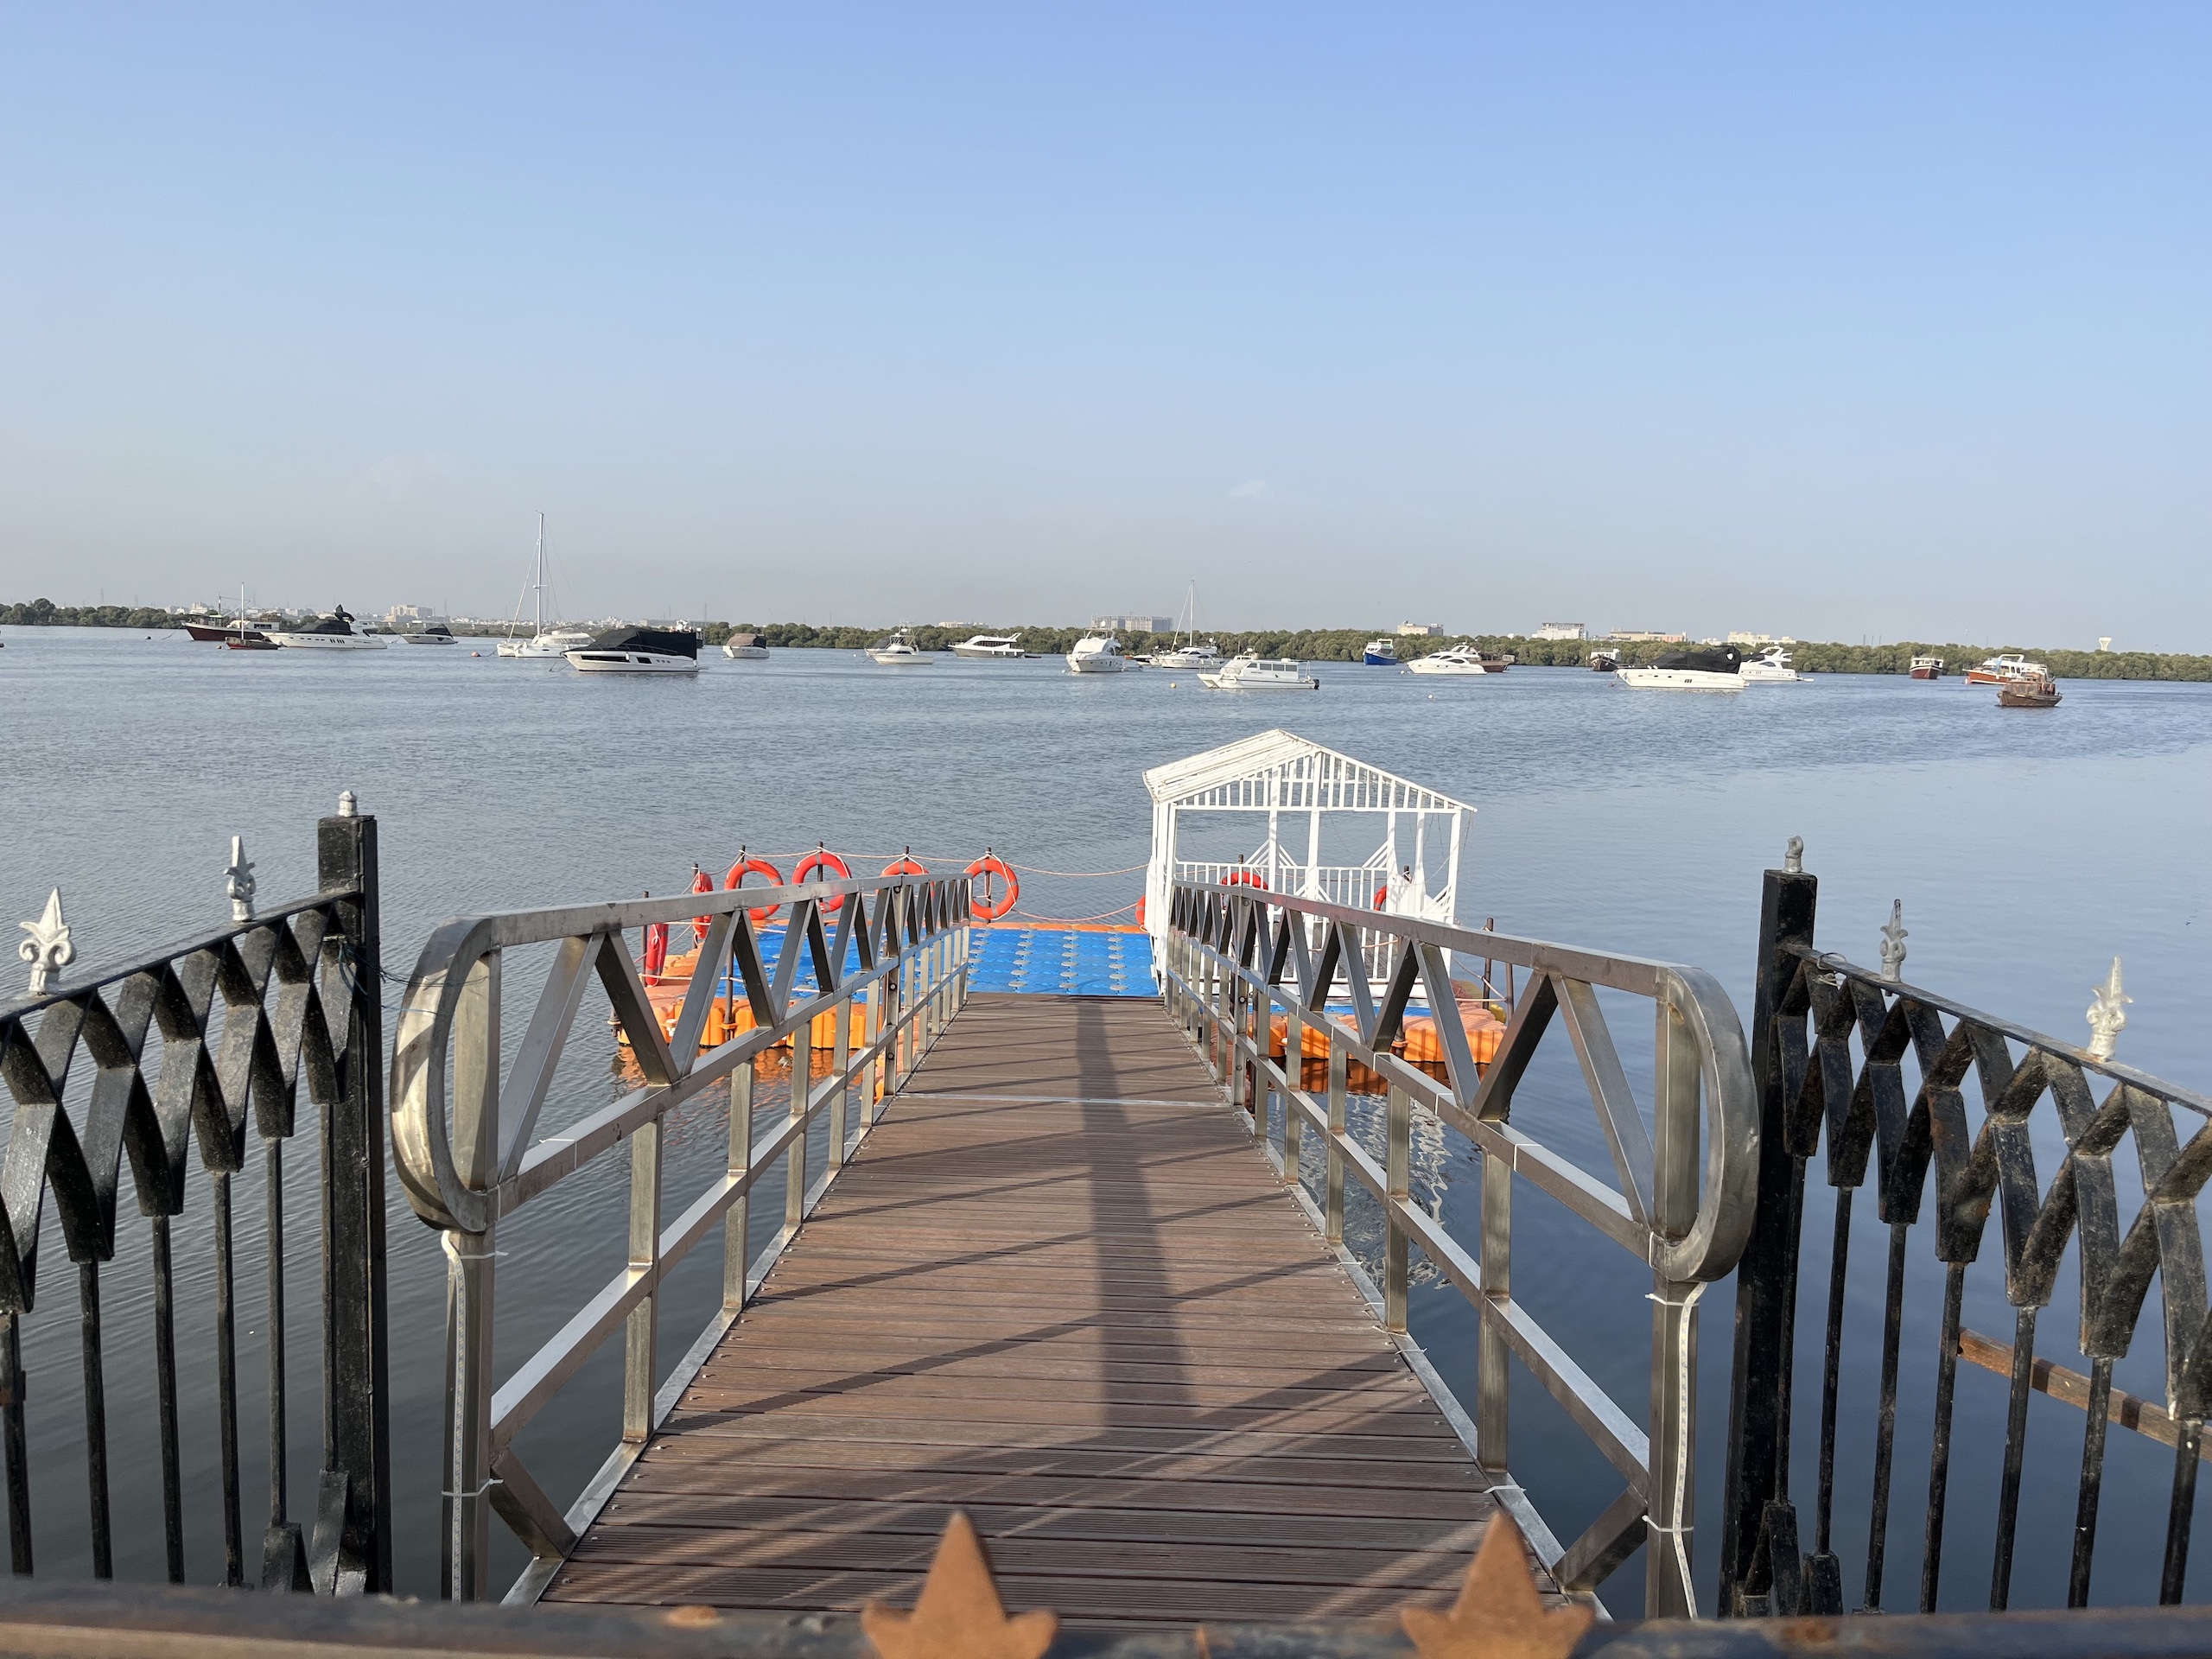 The jetty Marina Club, which was once the site of an ancient fishing village and is now a club for Karachi’s elite spread over more than 5 hectares of reclaimed land